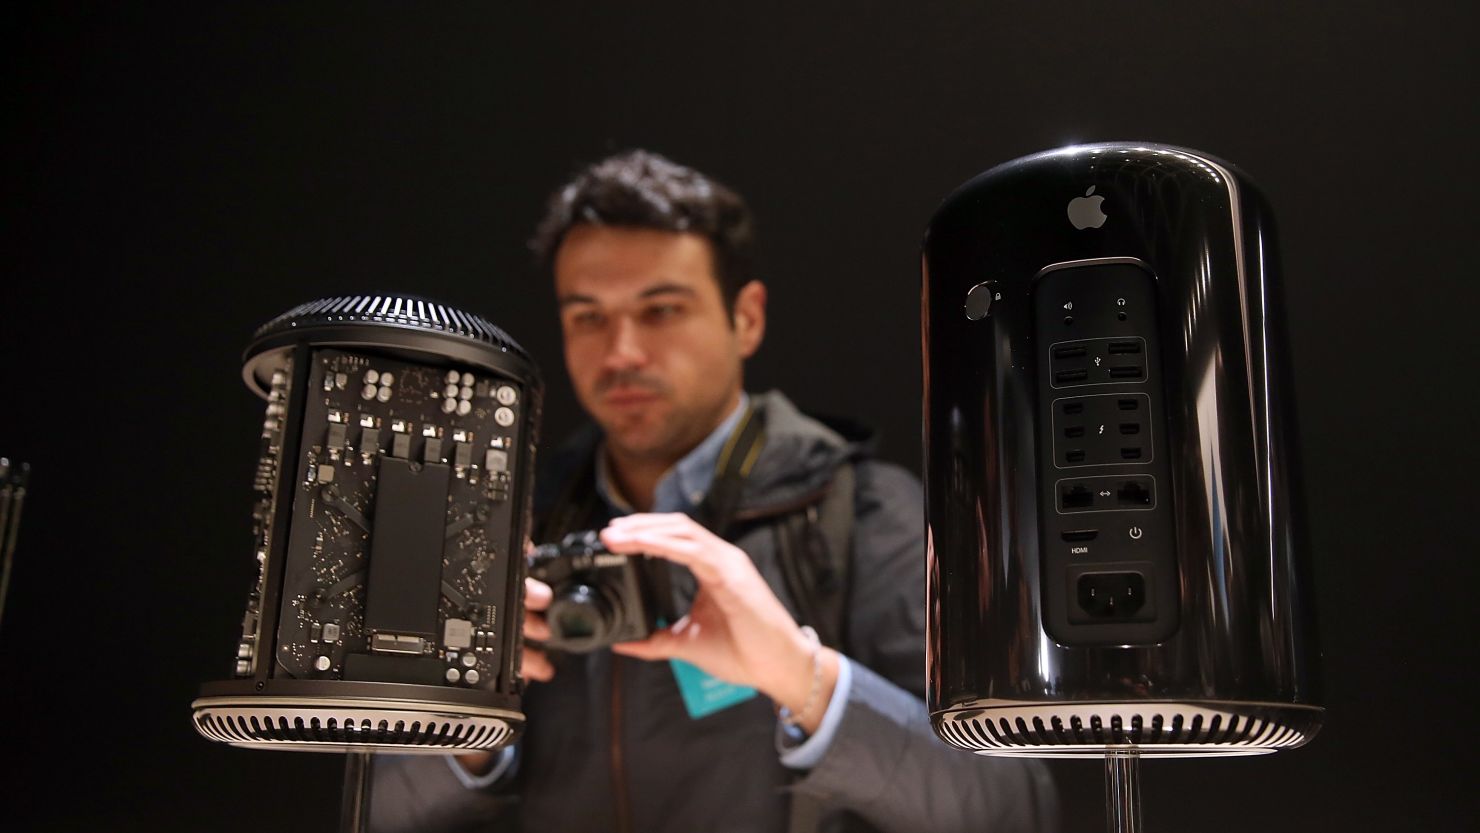 Apple's Mac Pro, which goes on sale Thursday, is designed for high-end users and starts at $2,999.